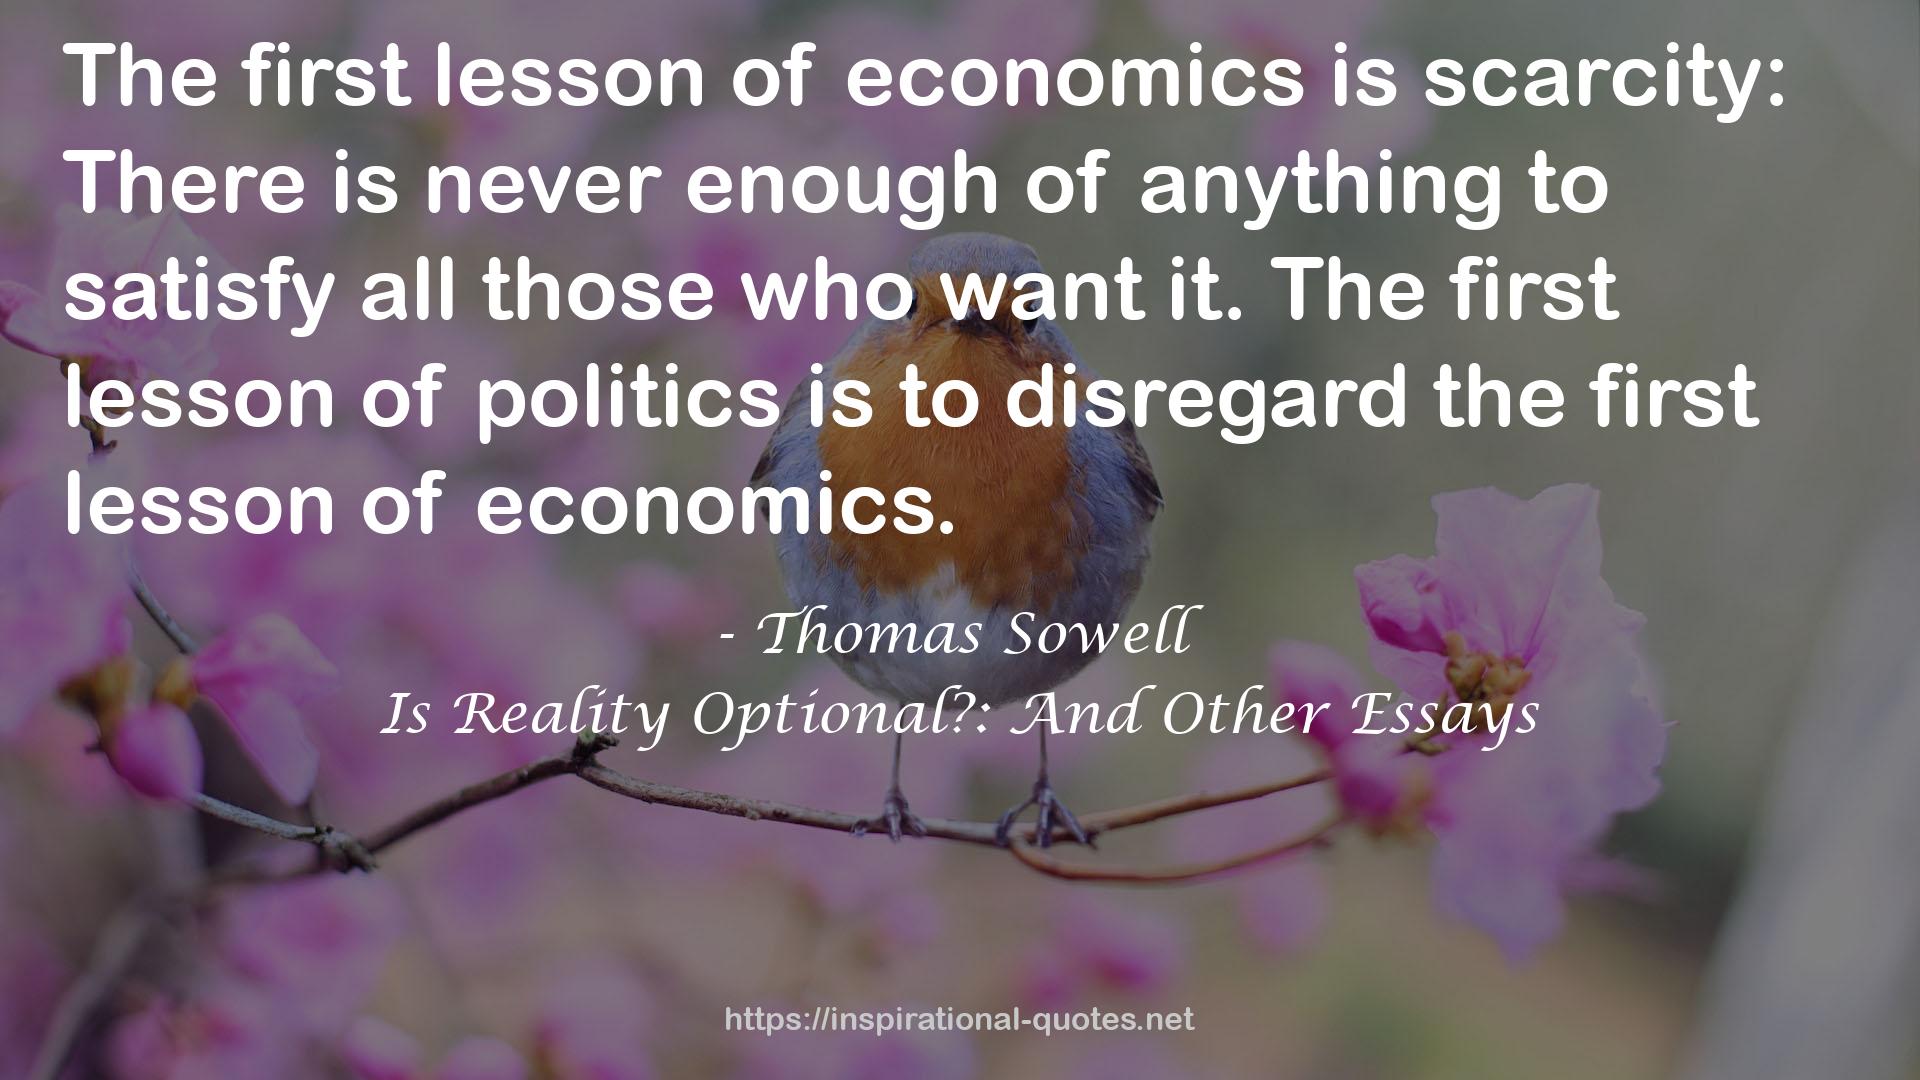 Is Reality Optional?: And Other Essays QUOTES